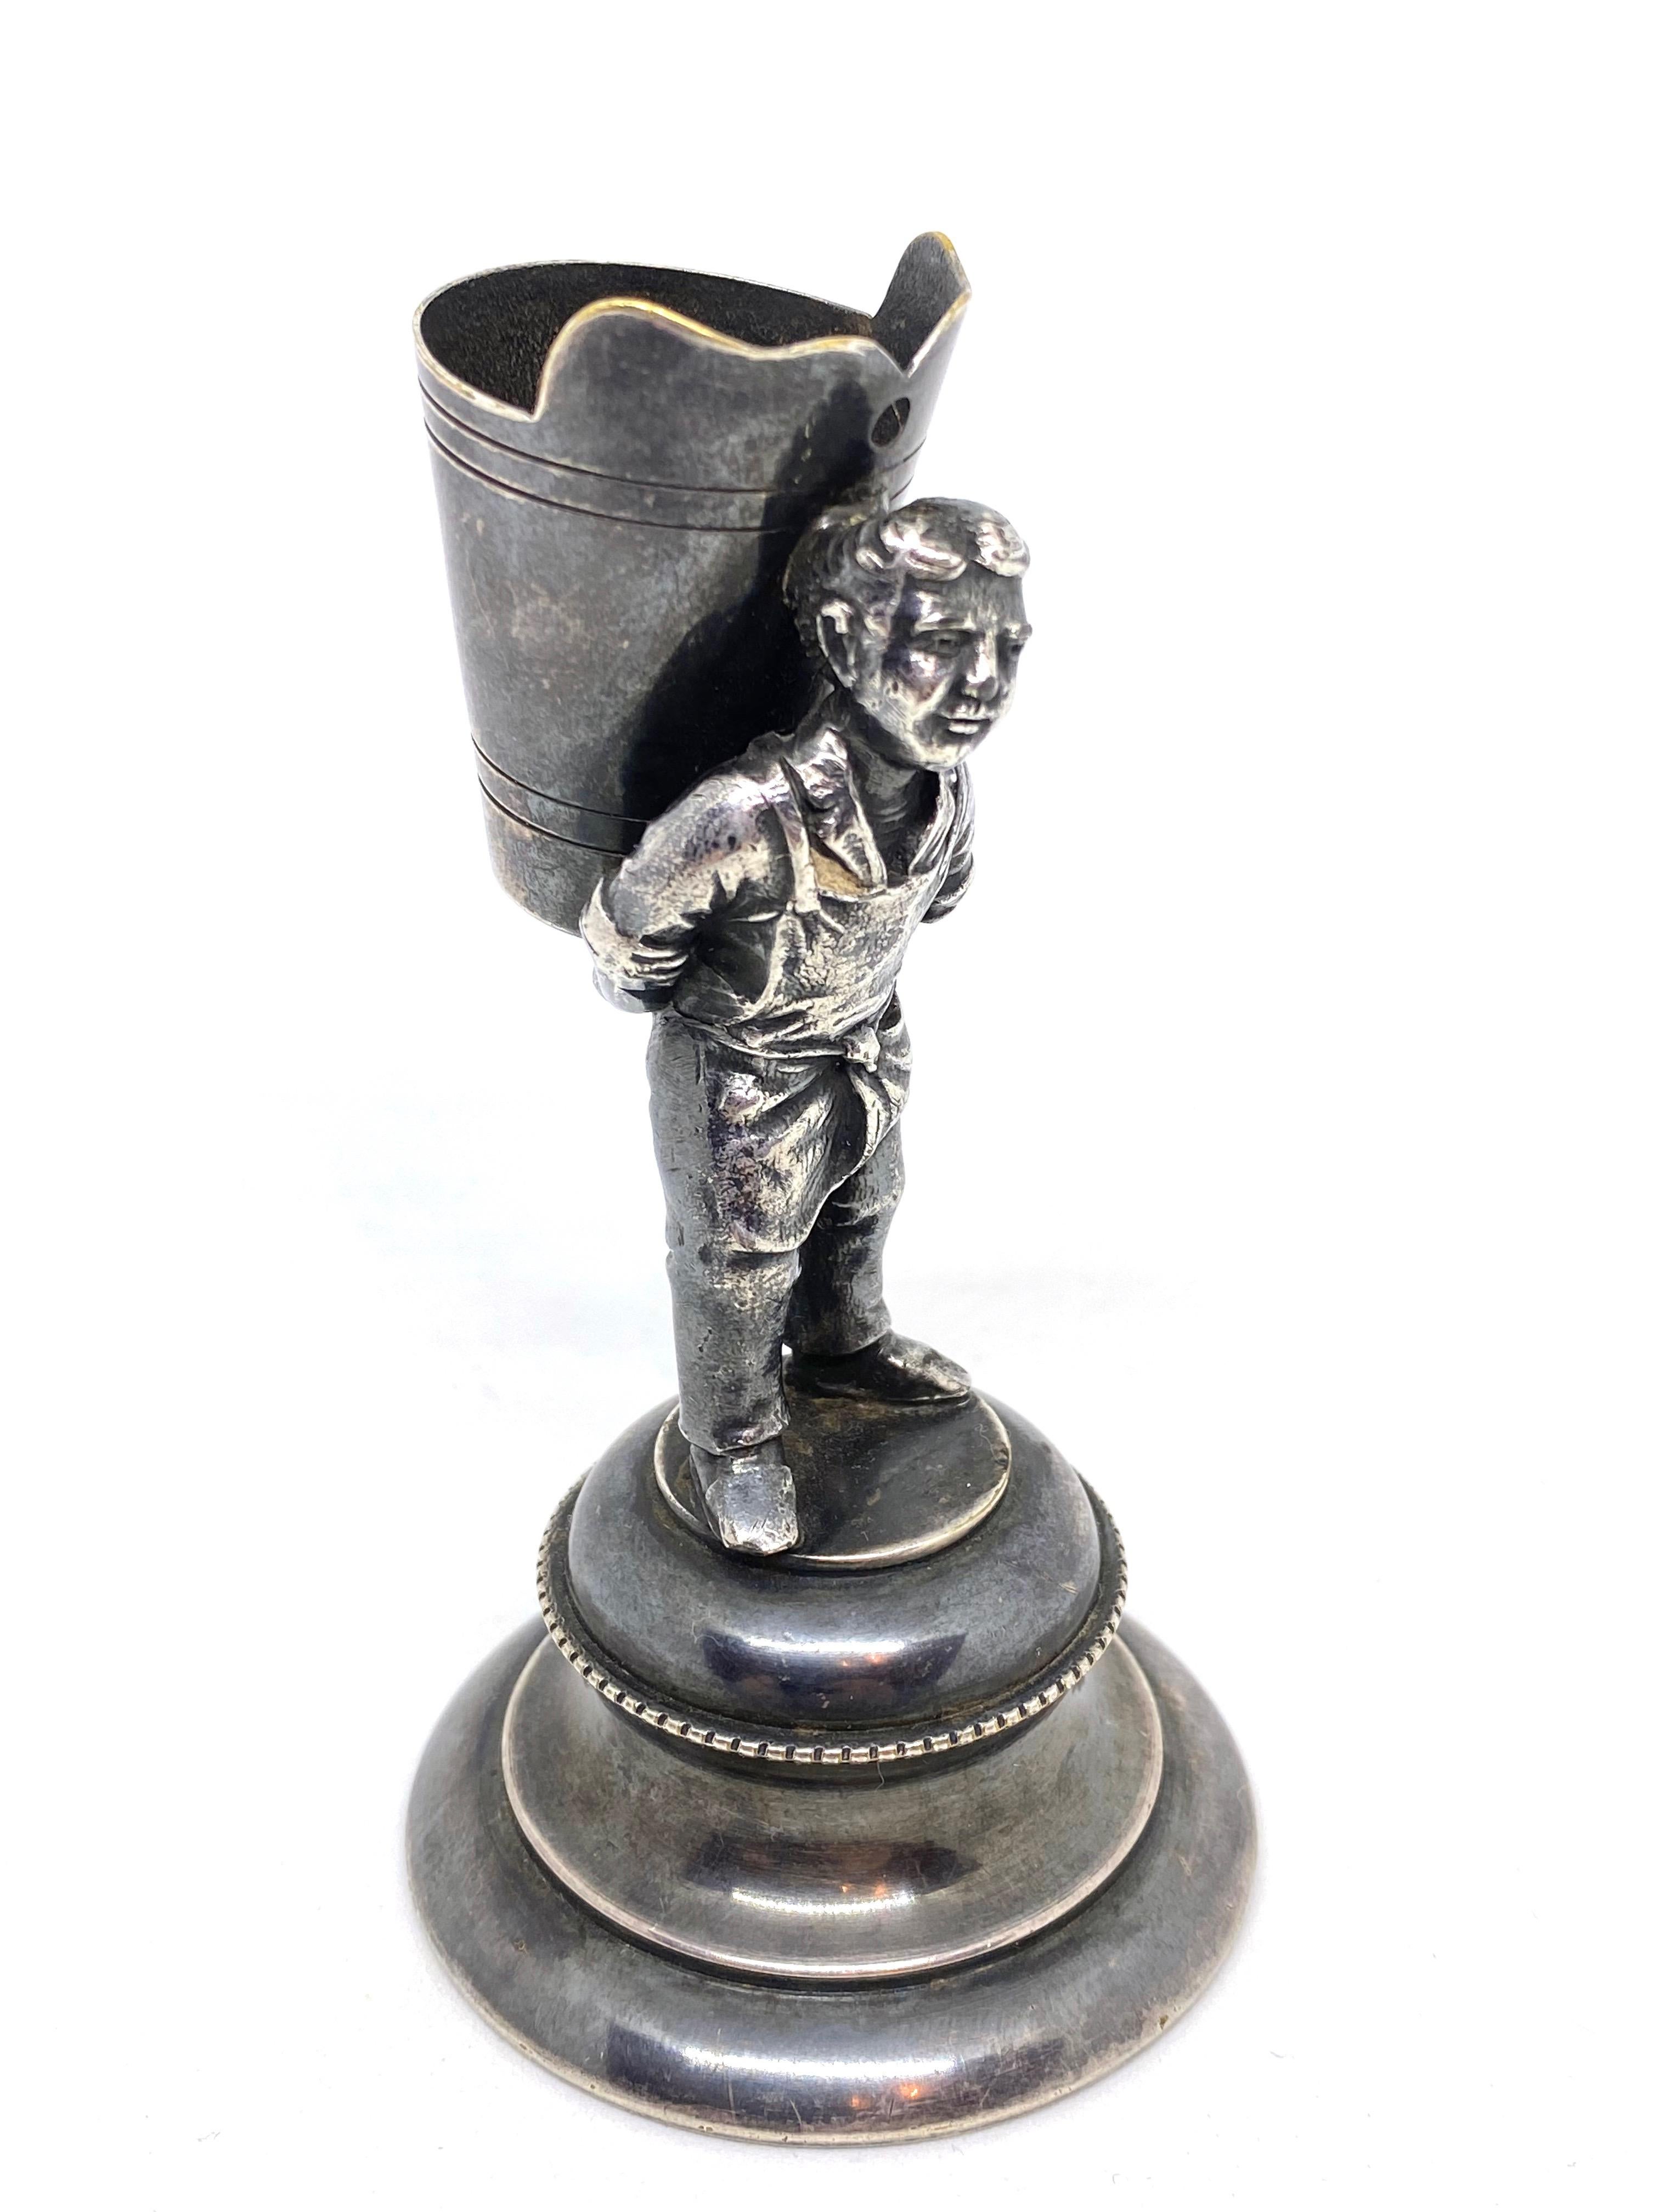 An antique decorative toothpick holder figure. Made of silver plated metal. A nice original antique item for displaying or just to use on your table. It is in the original as found condition. This piece has a beautiful patina and is in very good